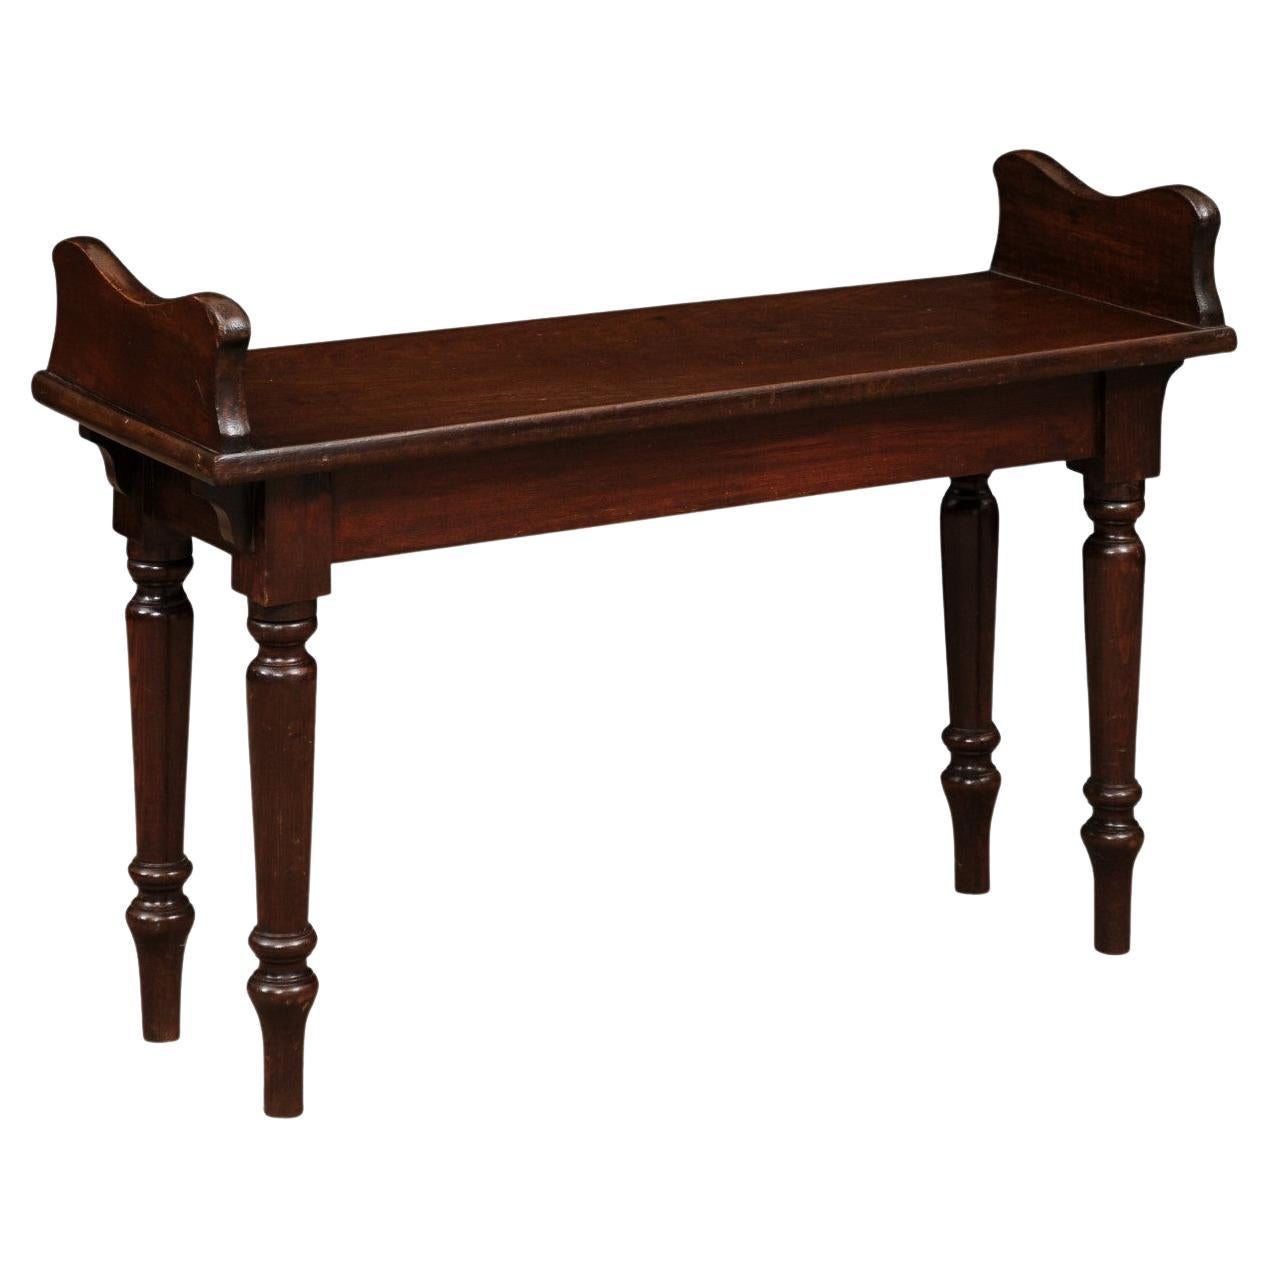  19th Century English Mahogany Hall / Window Bench with Handles For Sale